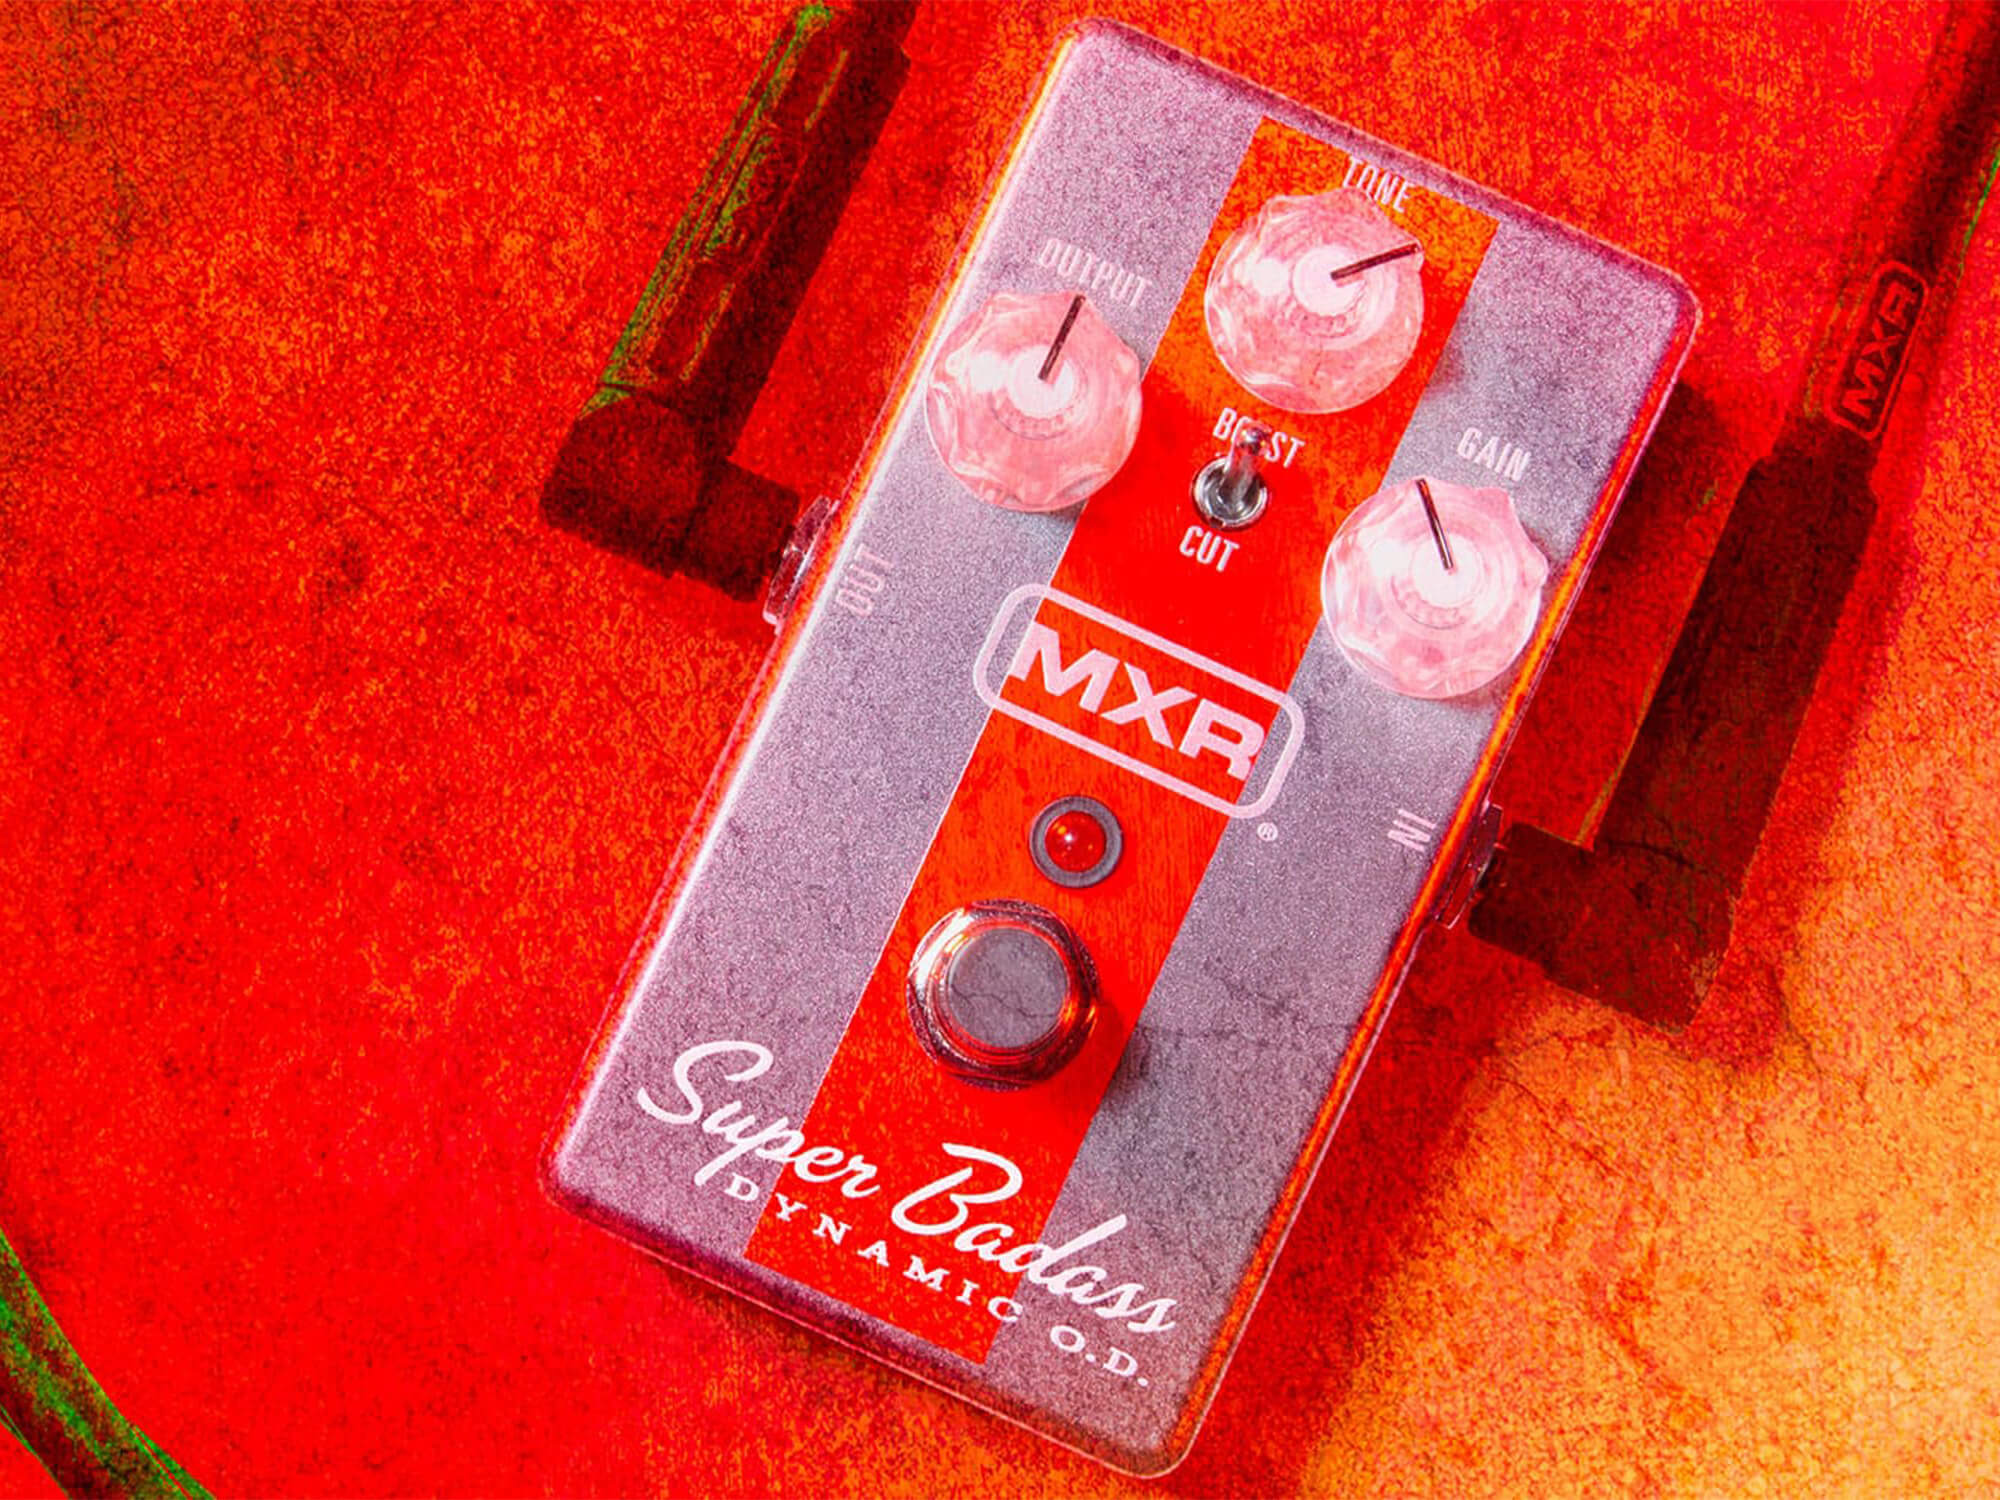 Guitarists think MXR's new overdrive takes after the Fulltone OCD